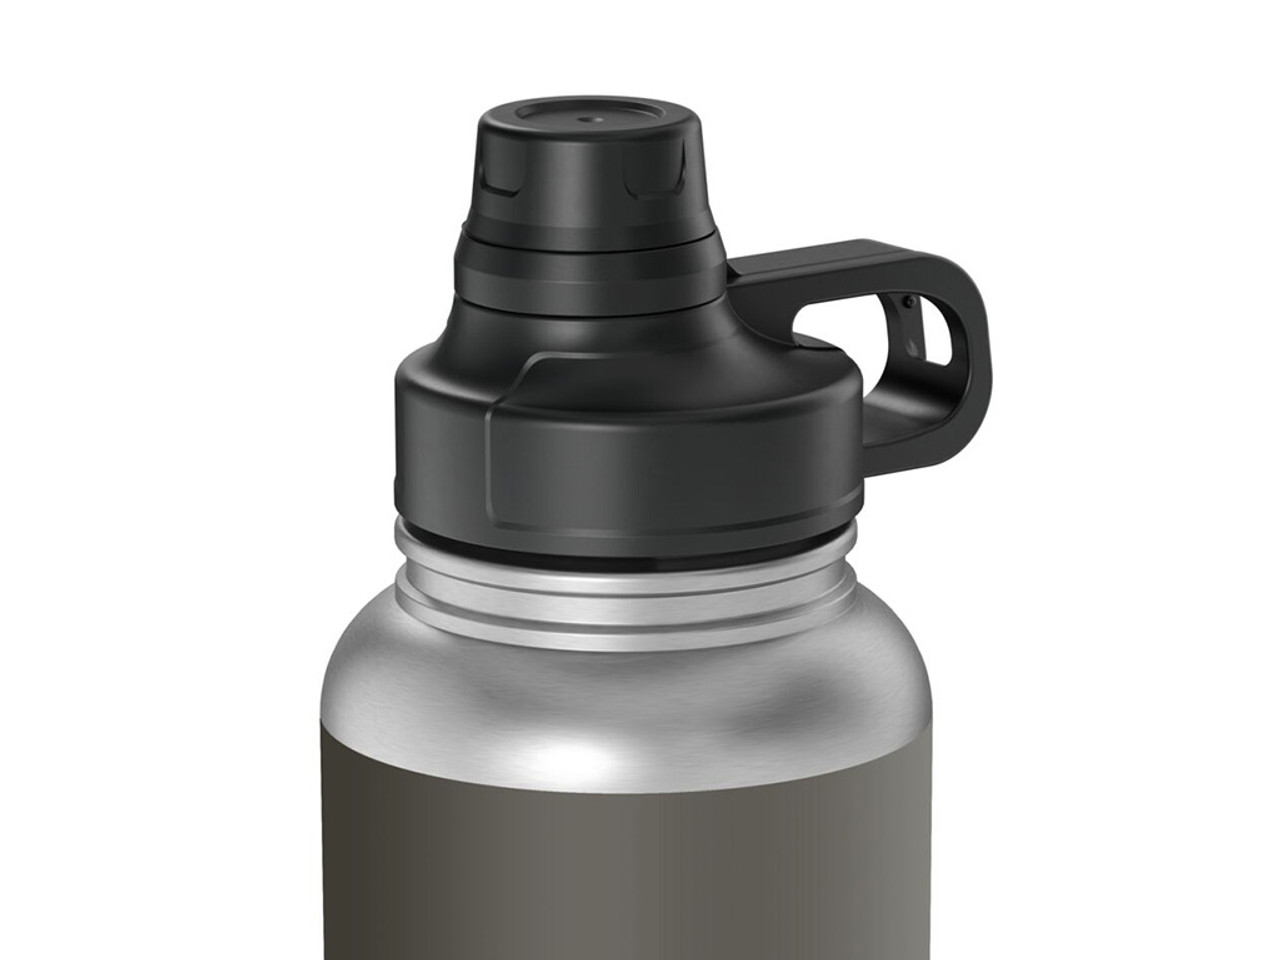 Dometic 900ml/32oz Thermo Bottle